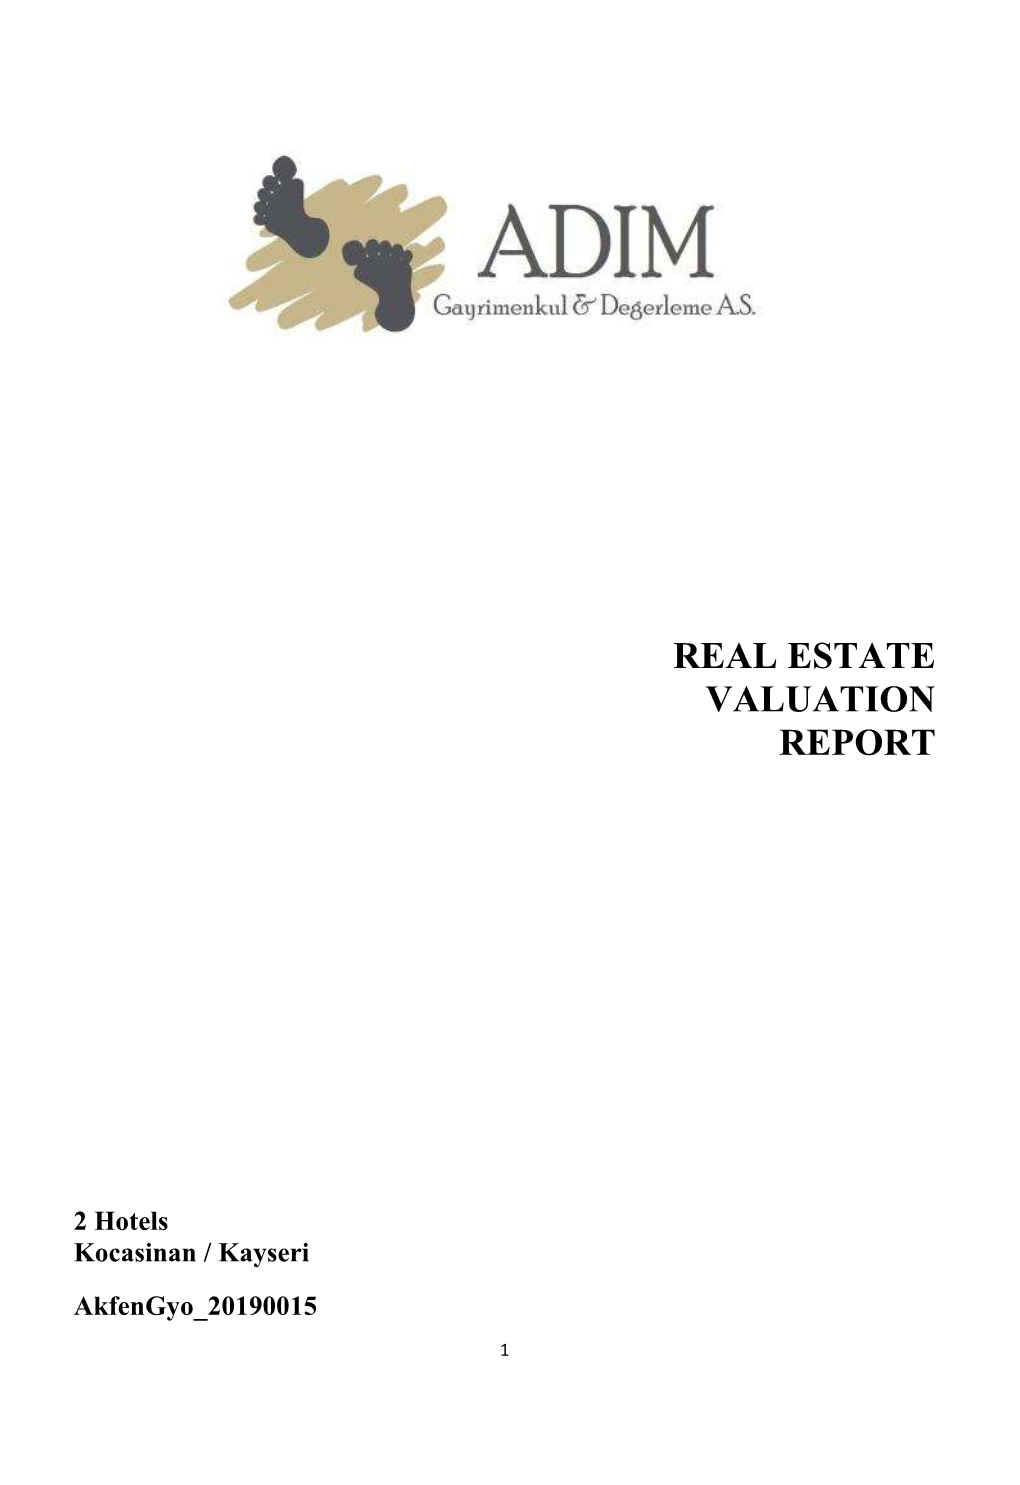 Real Estate Valuation Report